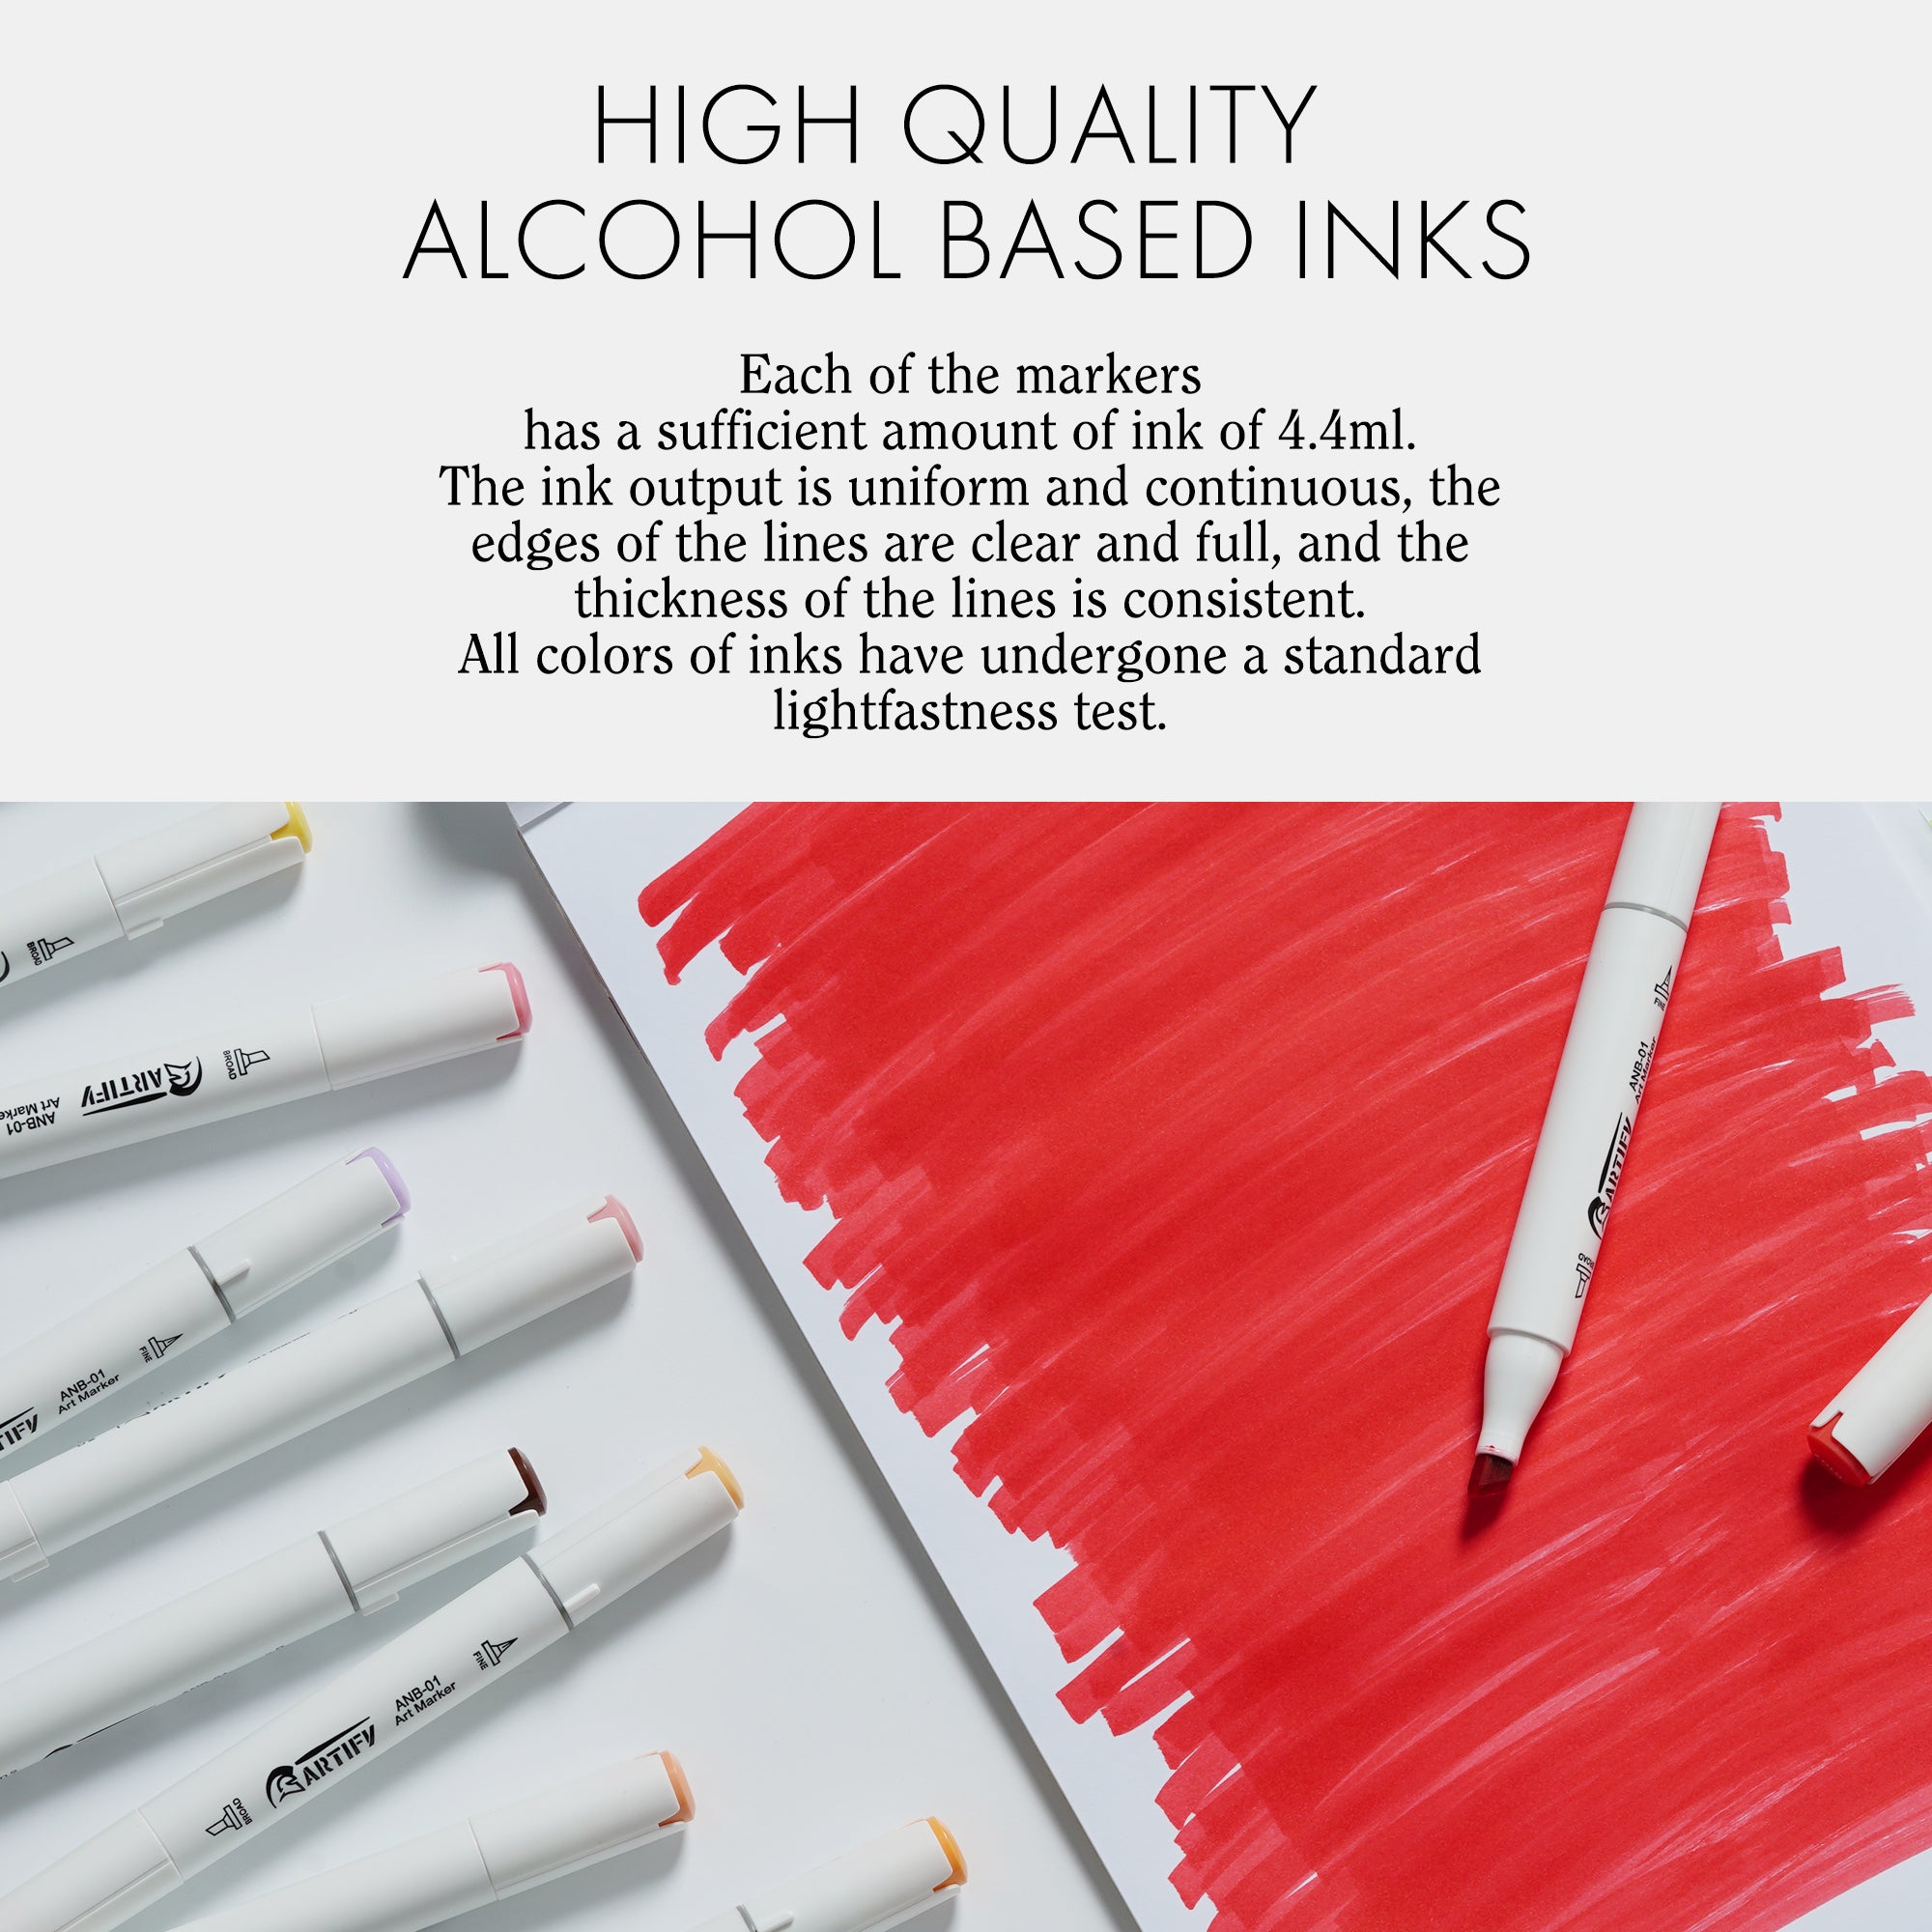 ARTIFY 80 Colors Alcohol Brush Markers — Brush & Chisel Tips, Vibrant Colors